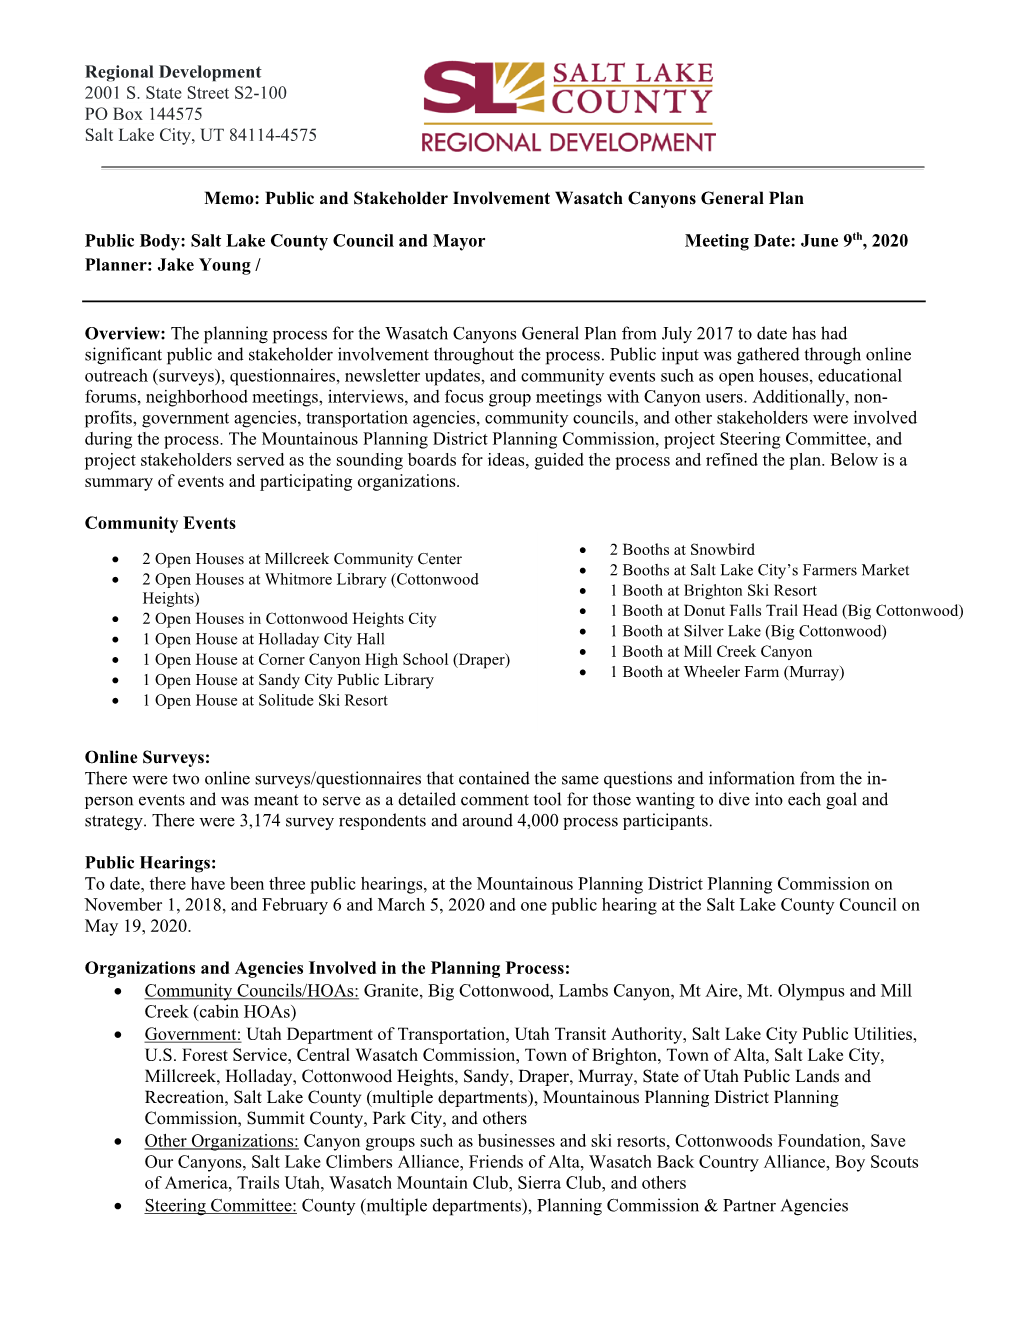 Public and Stakeholder Involvement Wasatch Canyons General Plan